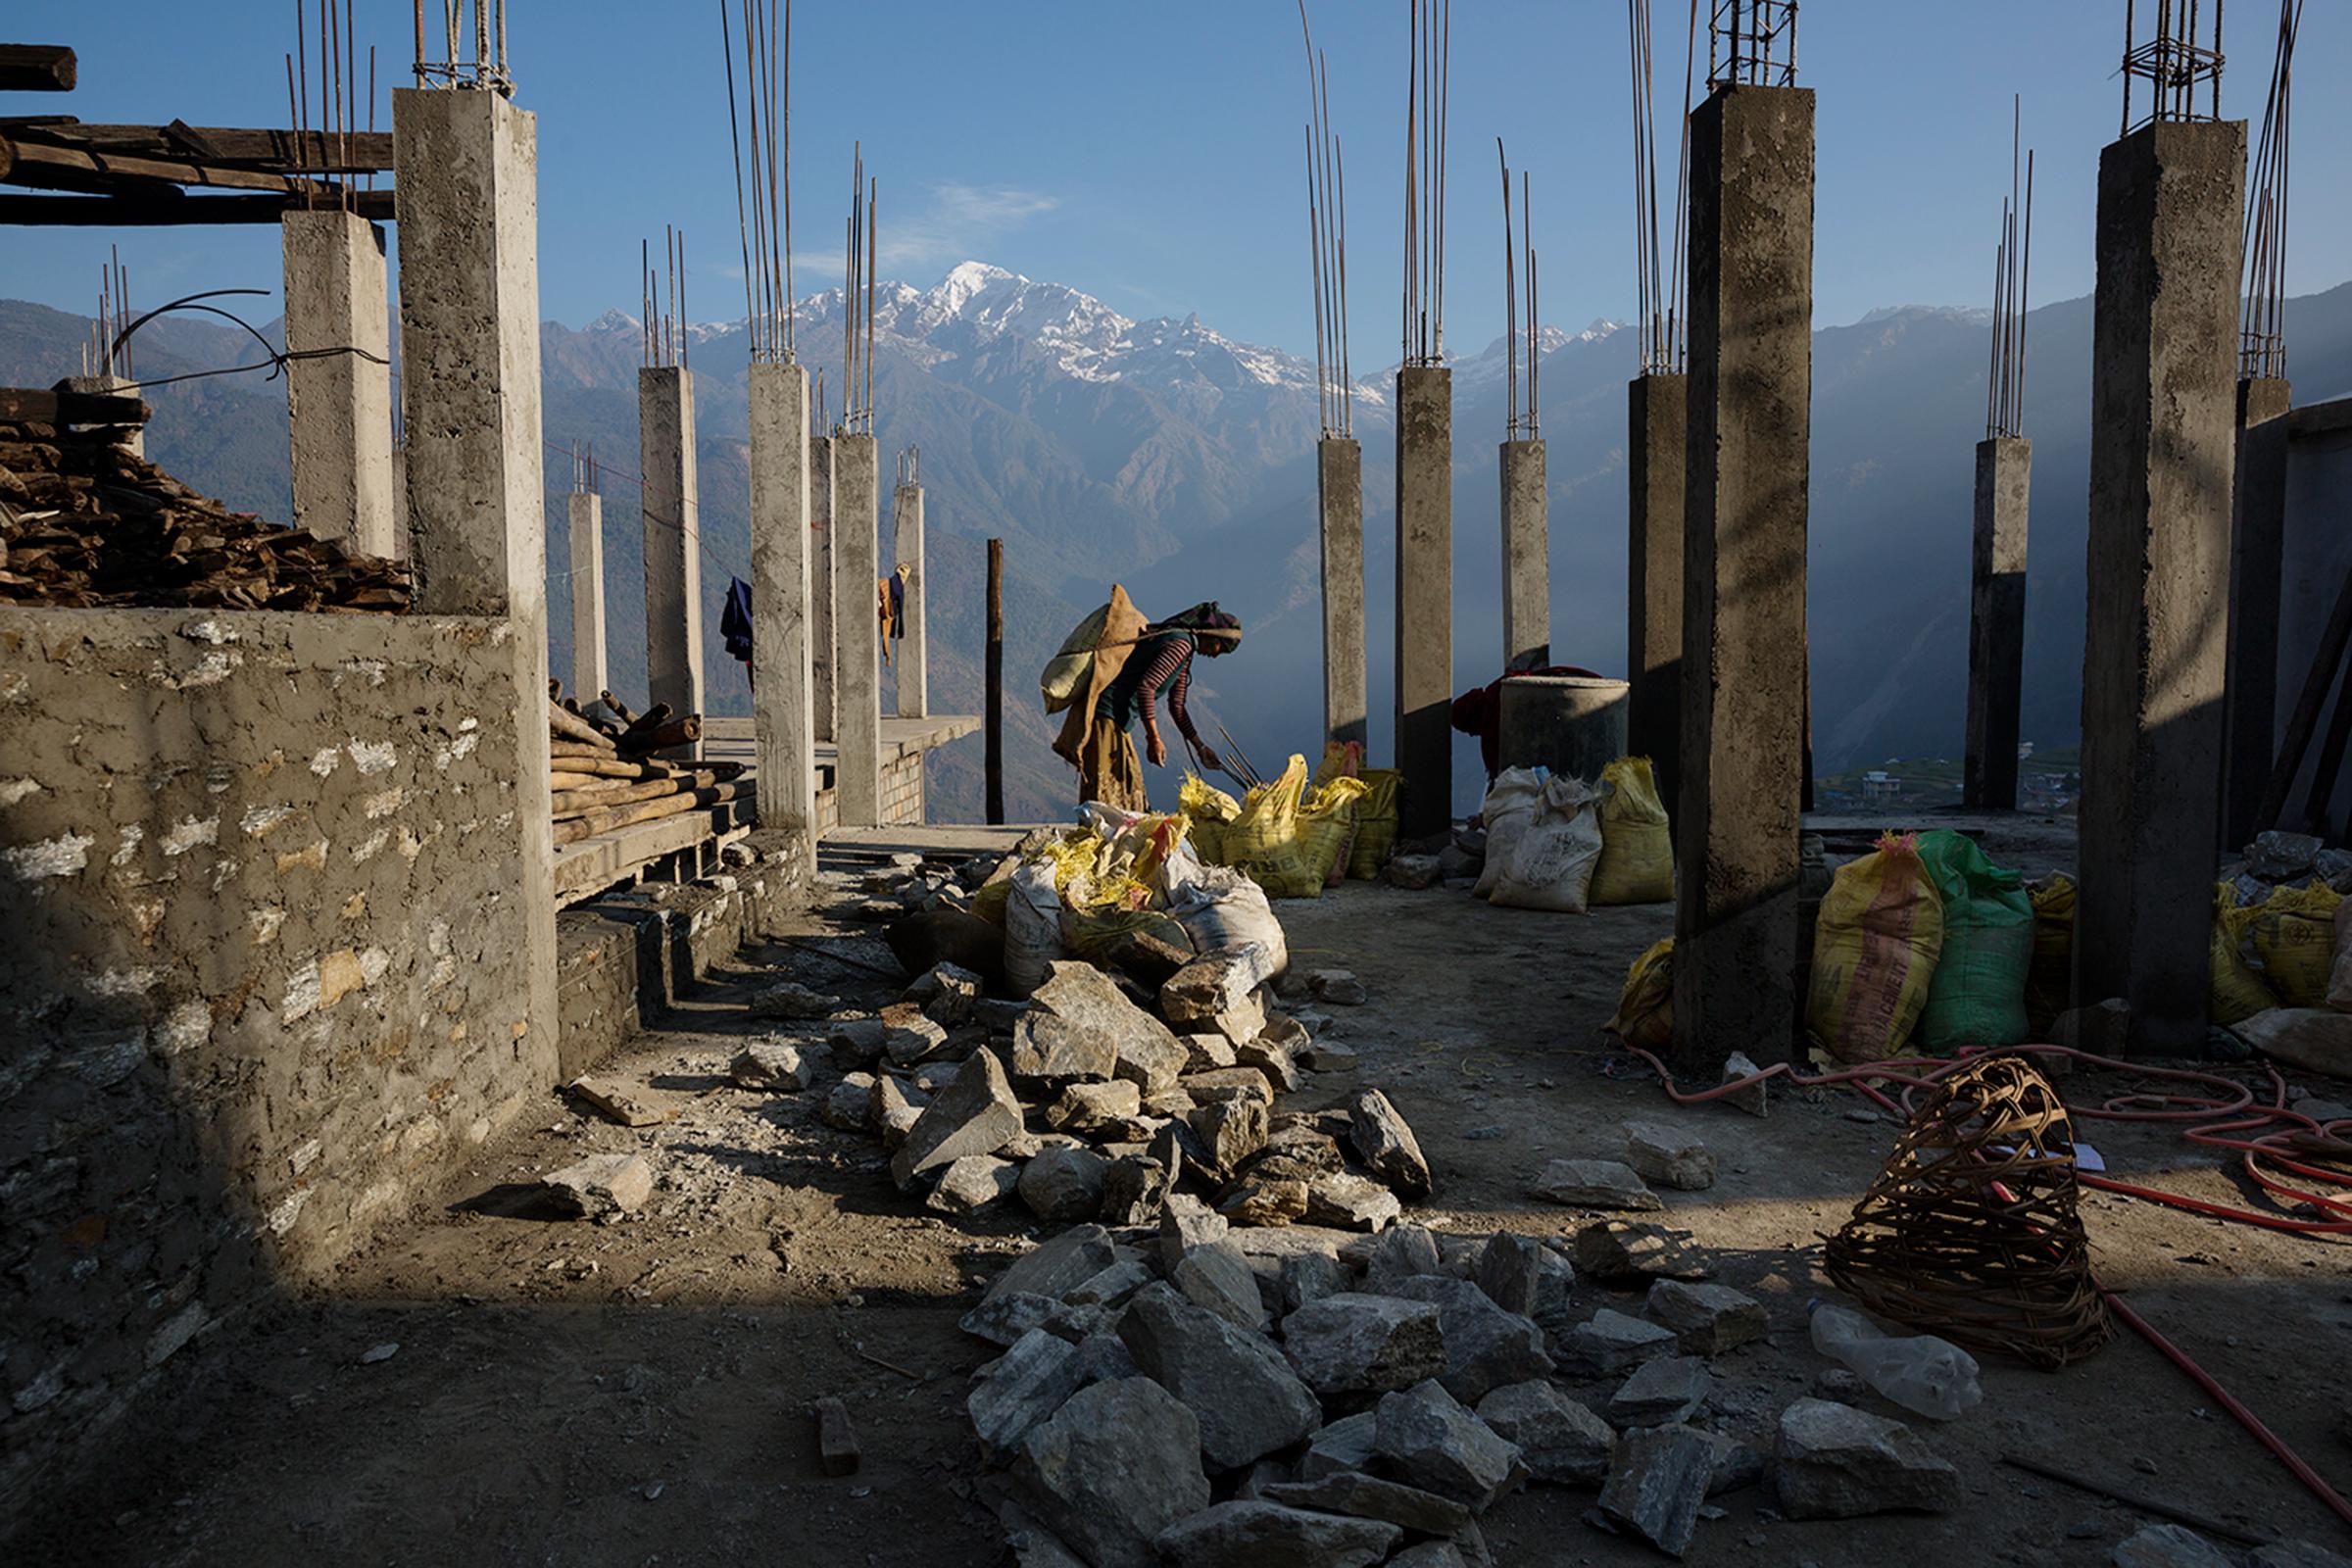 Villagers rebuild houses and pathways in the Himalayan village of Barpak, in Gorkha district, Nepal, at the epicenter of the April and May 2015 earthquakes which killed 9,000 people, on April 6, 2016.